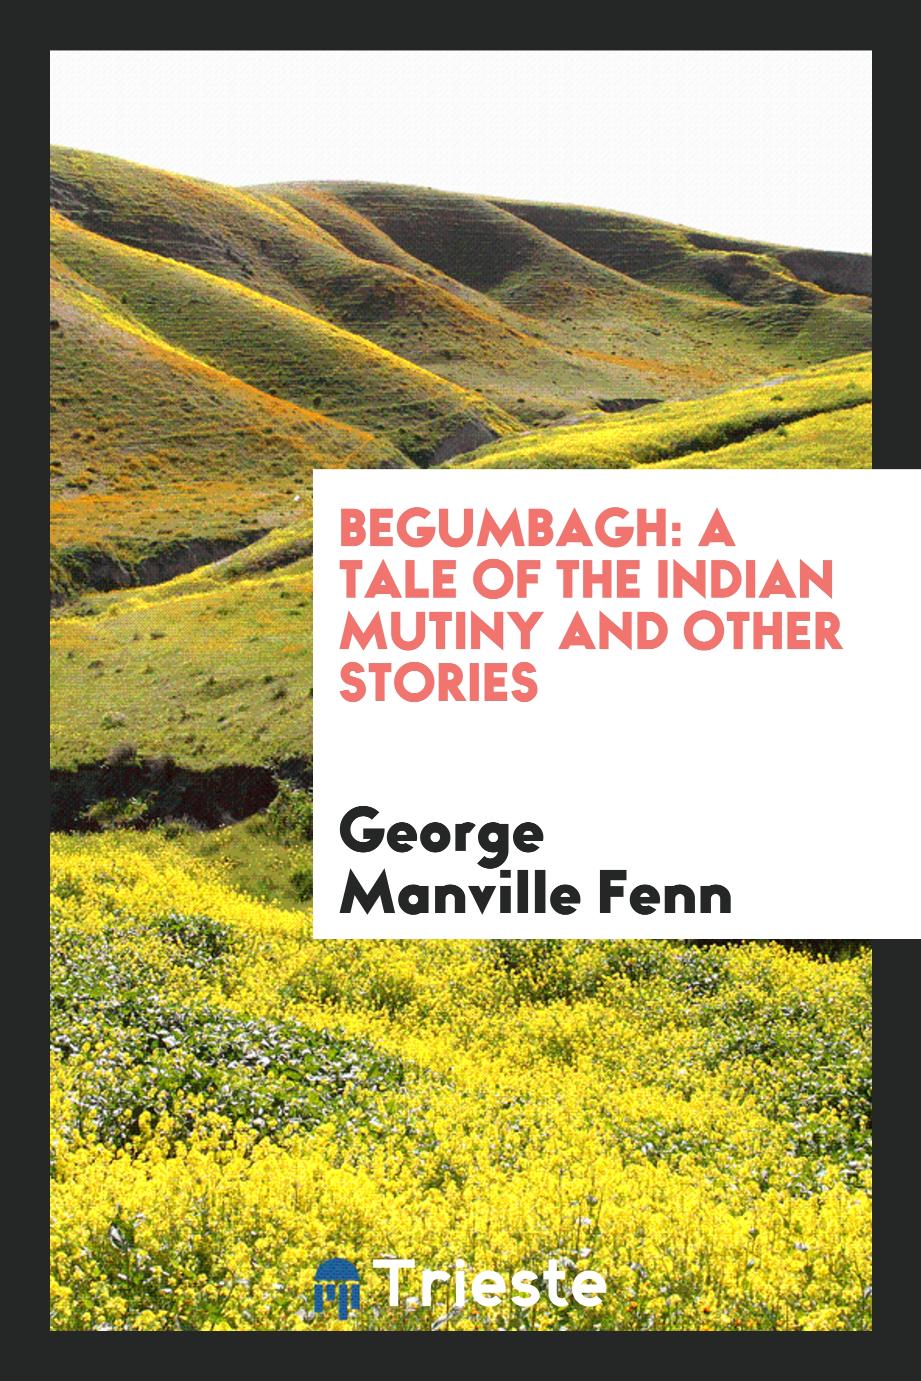 Begumbagh: a tale of the Indian mutiny and other stories